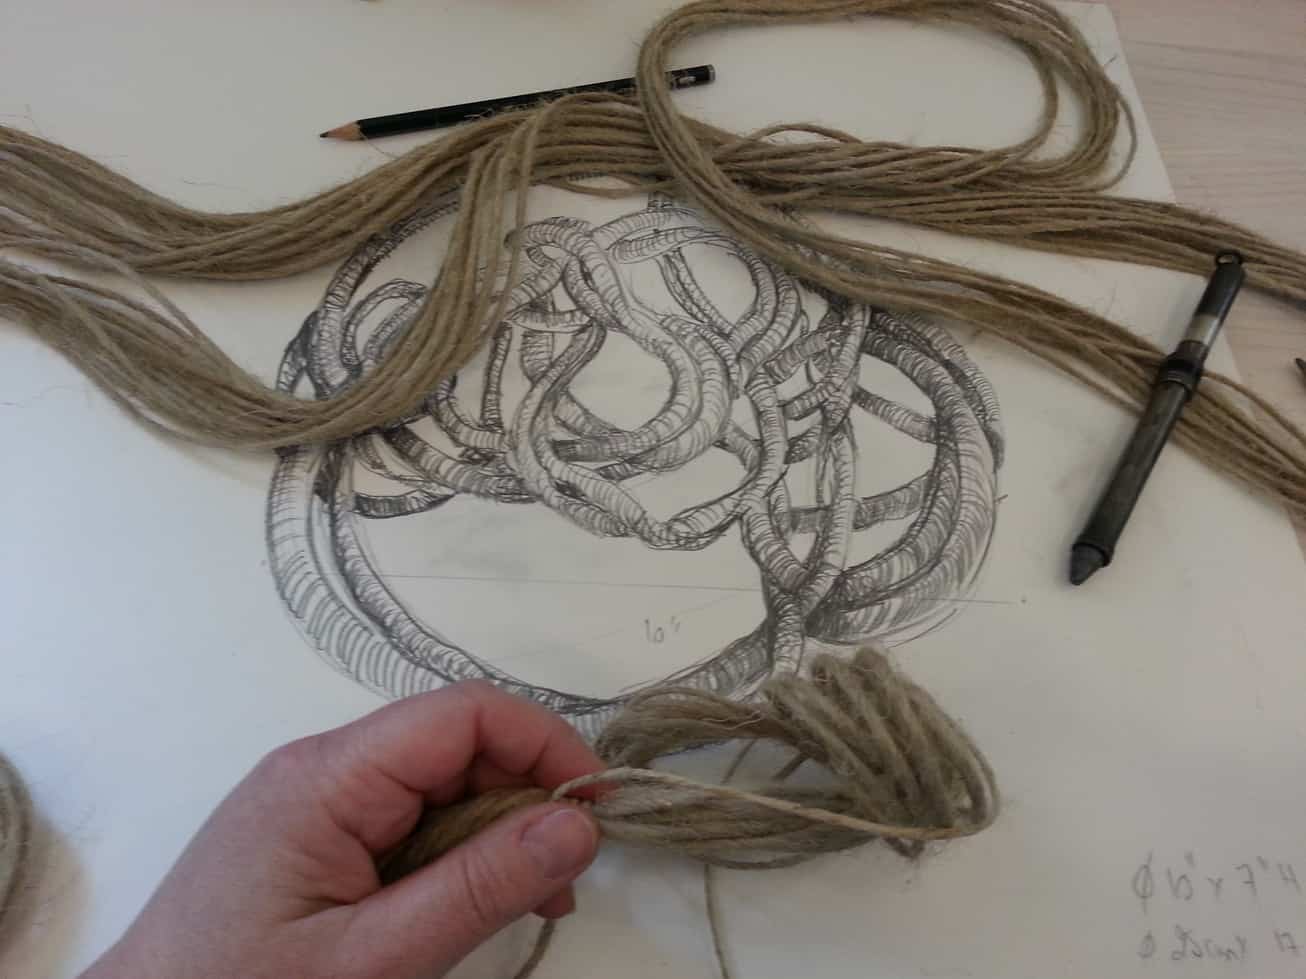 linen string and preparatory drawings by sculptor Aude Franjou